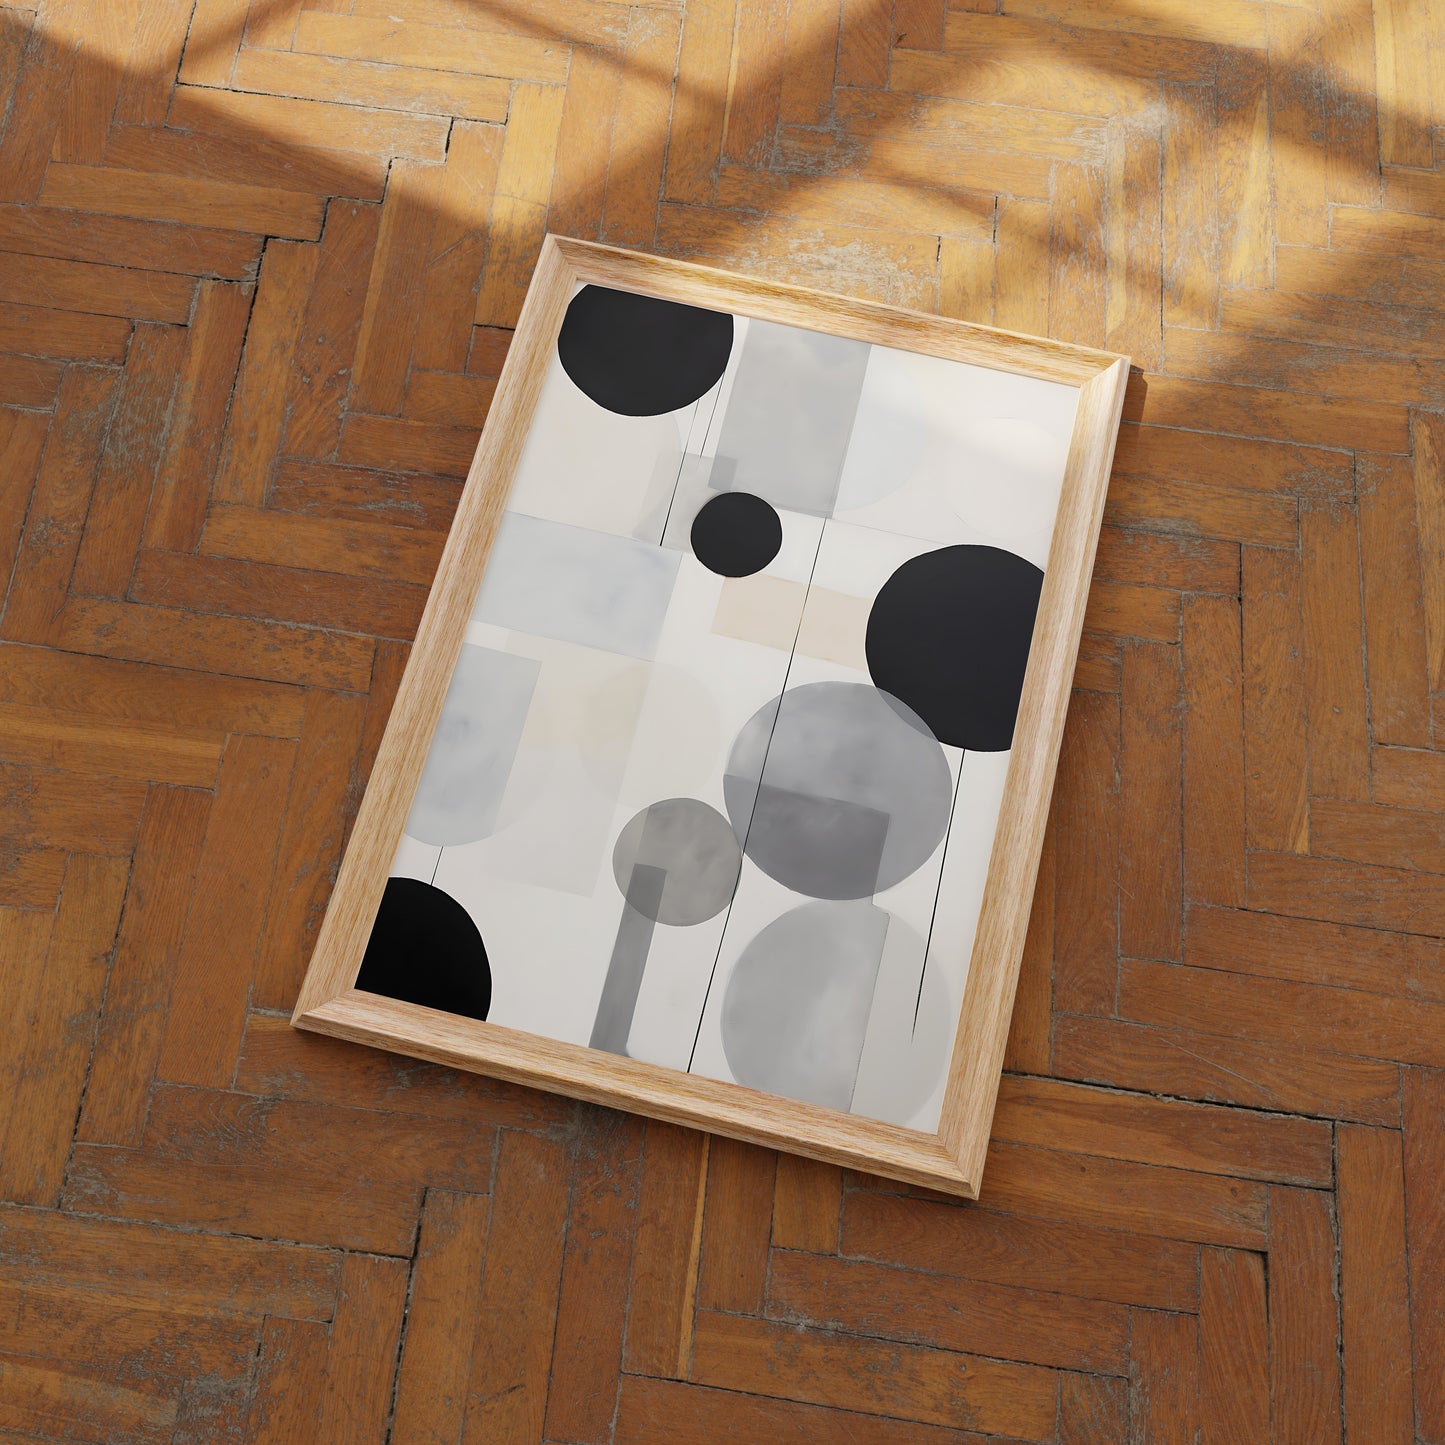 Abstract art with black and white circles in a wooden frame on a parquet floor.